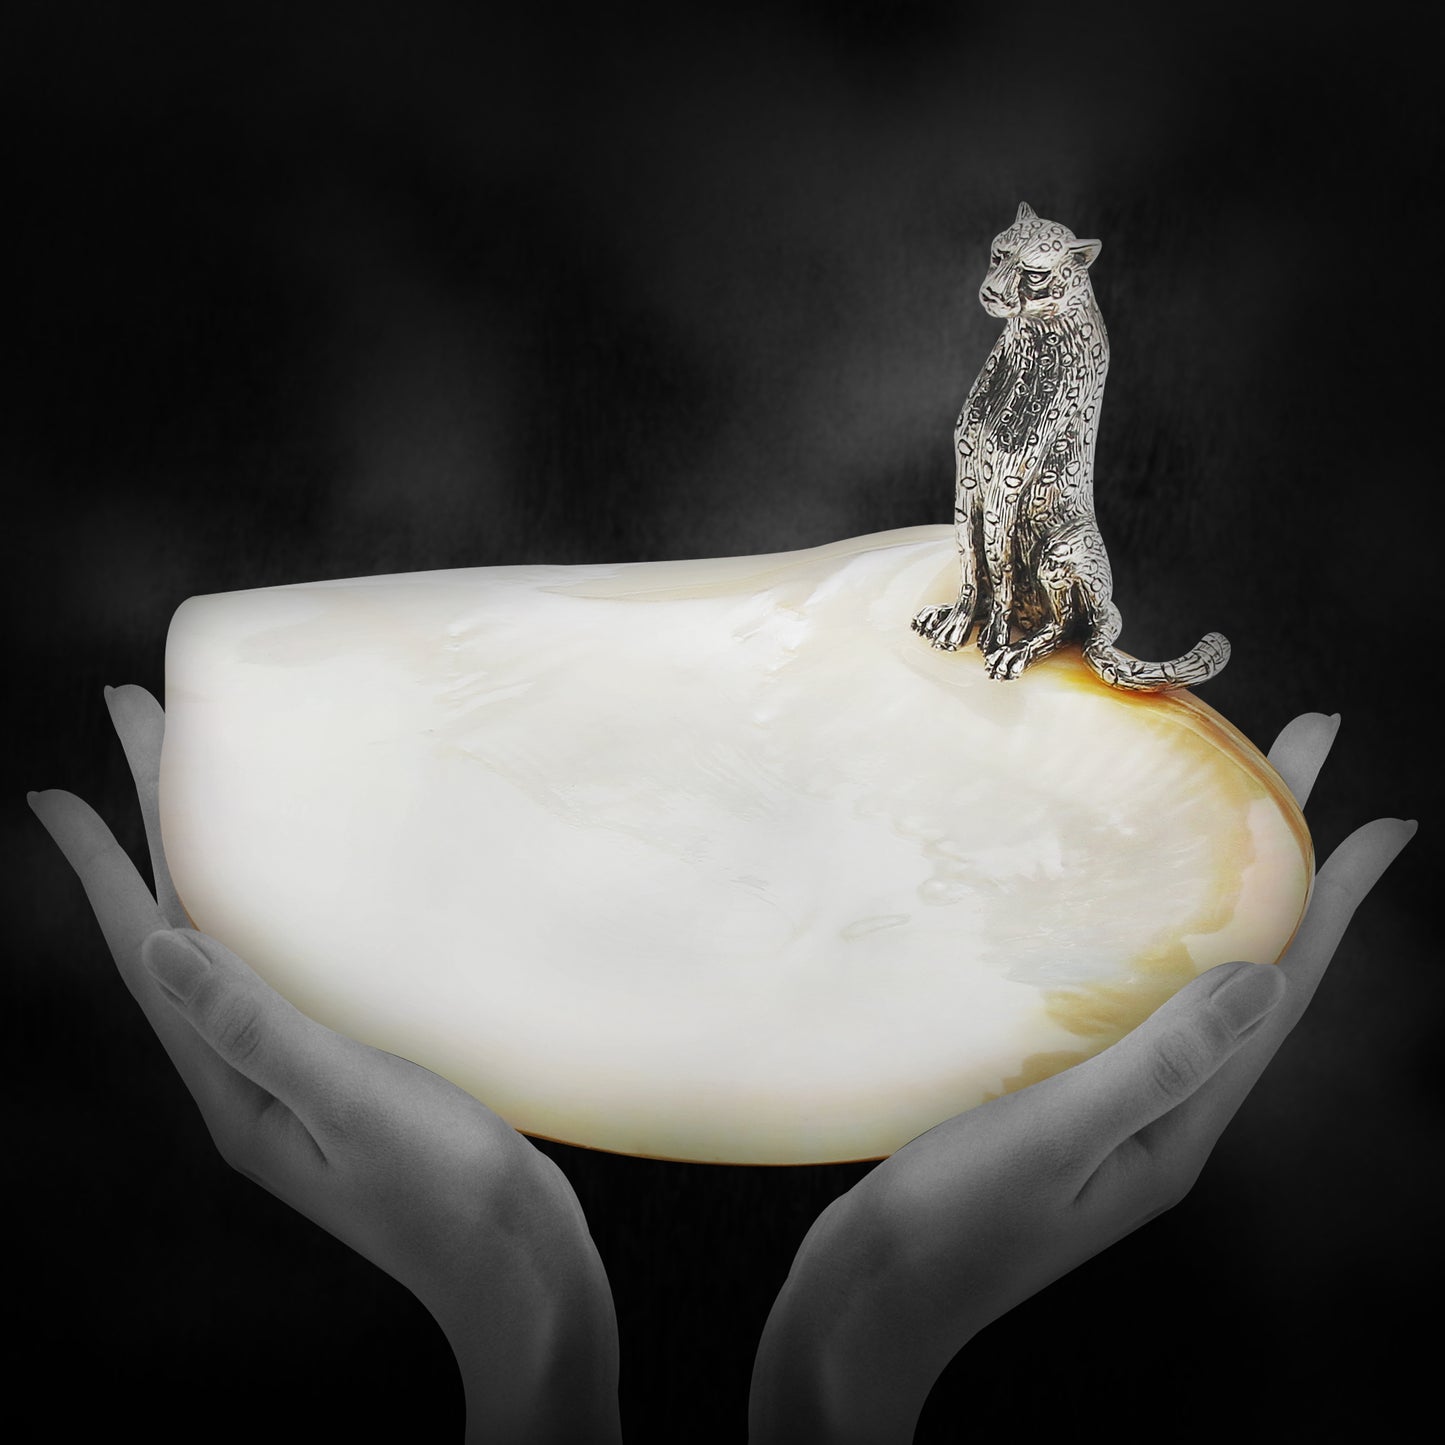 Mother of Pearl Plate with Cheetah